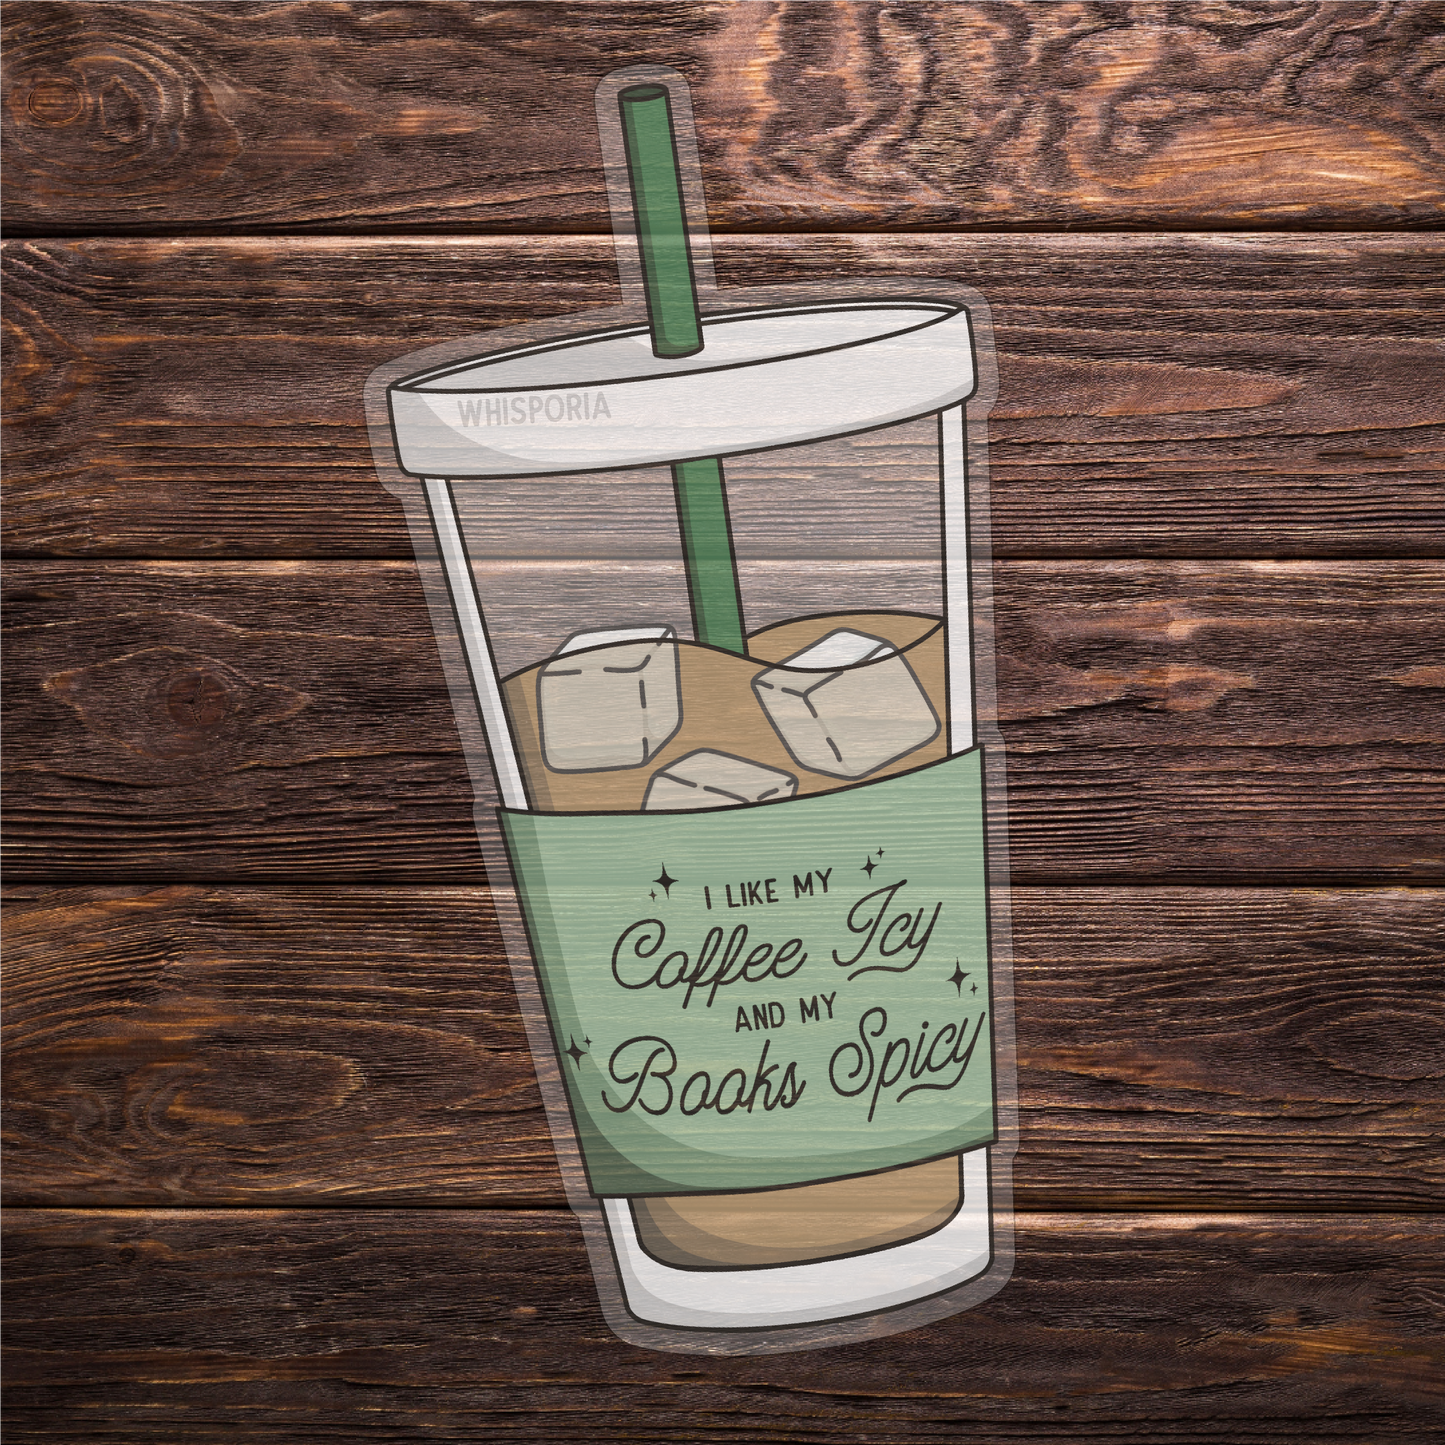 Coffee Icy, Books Spicy Coffee Cup Sticker